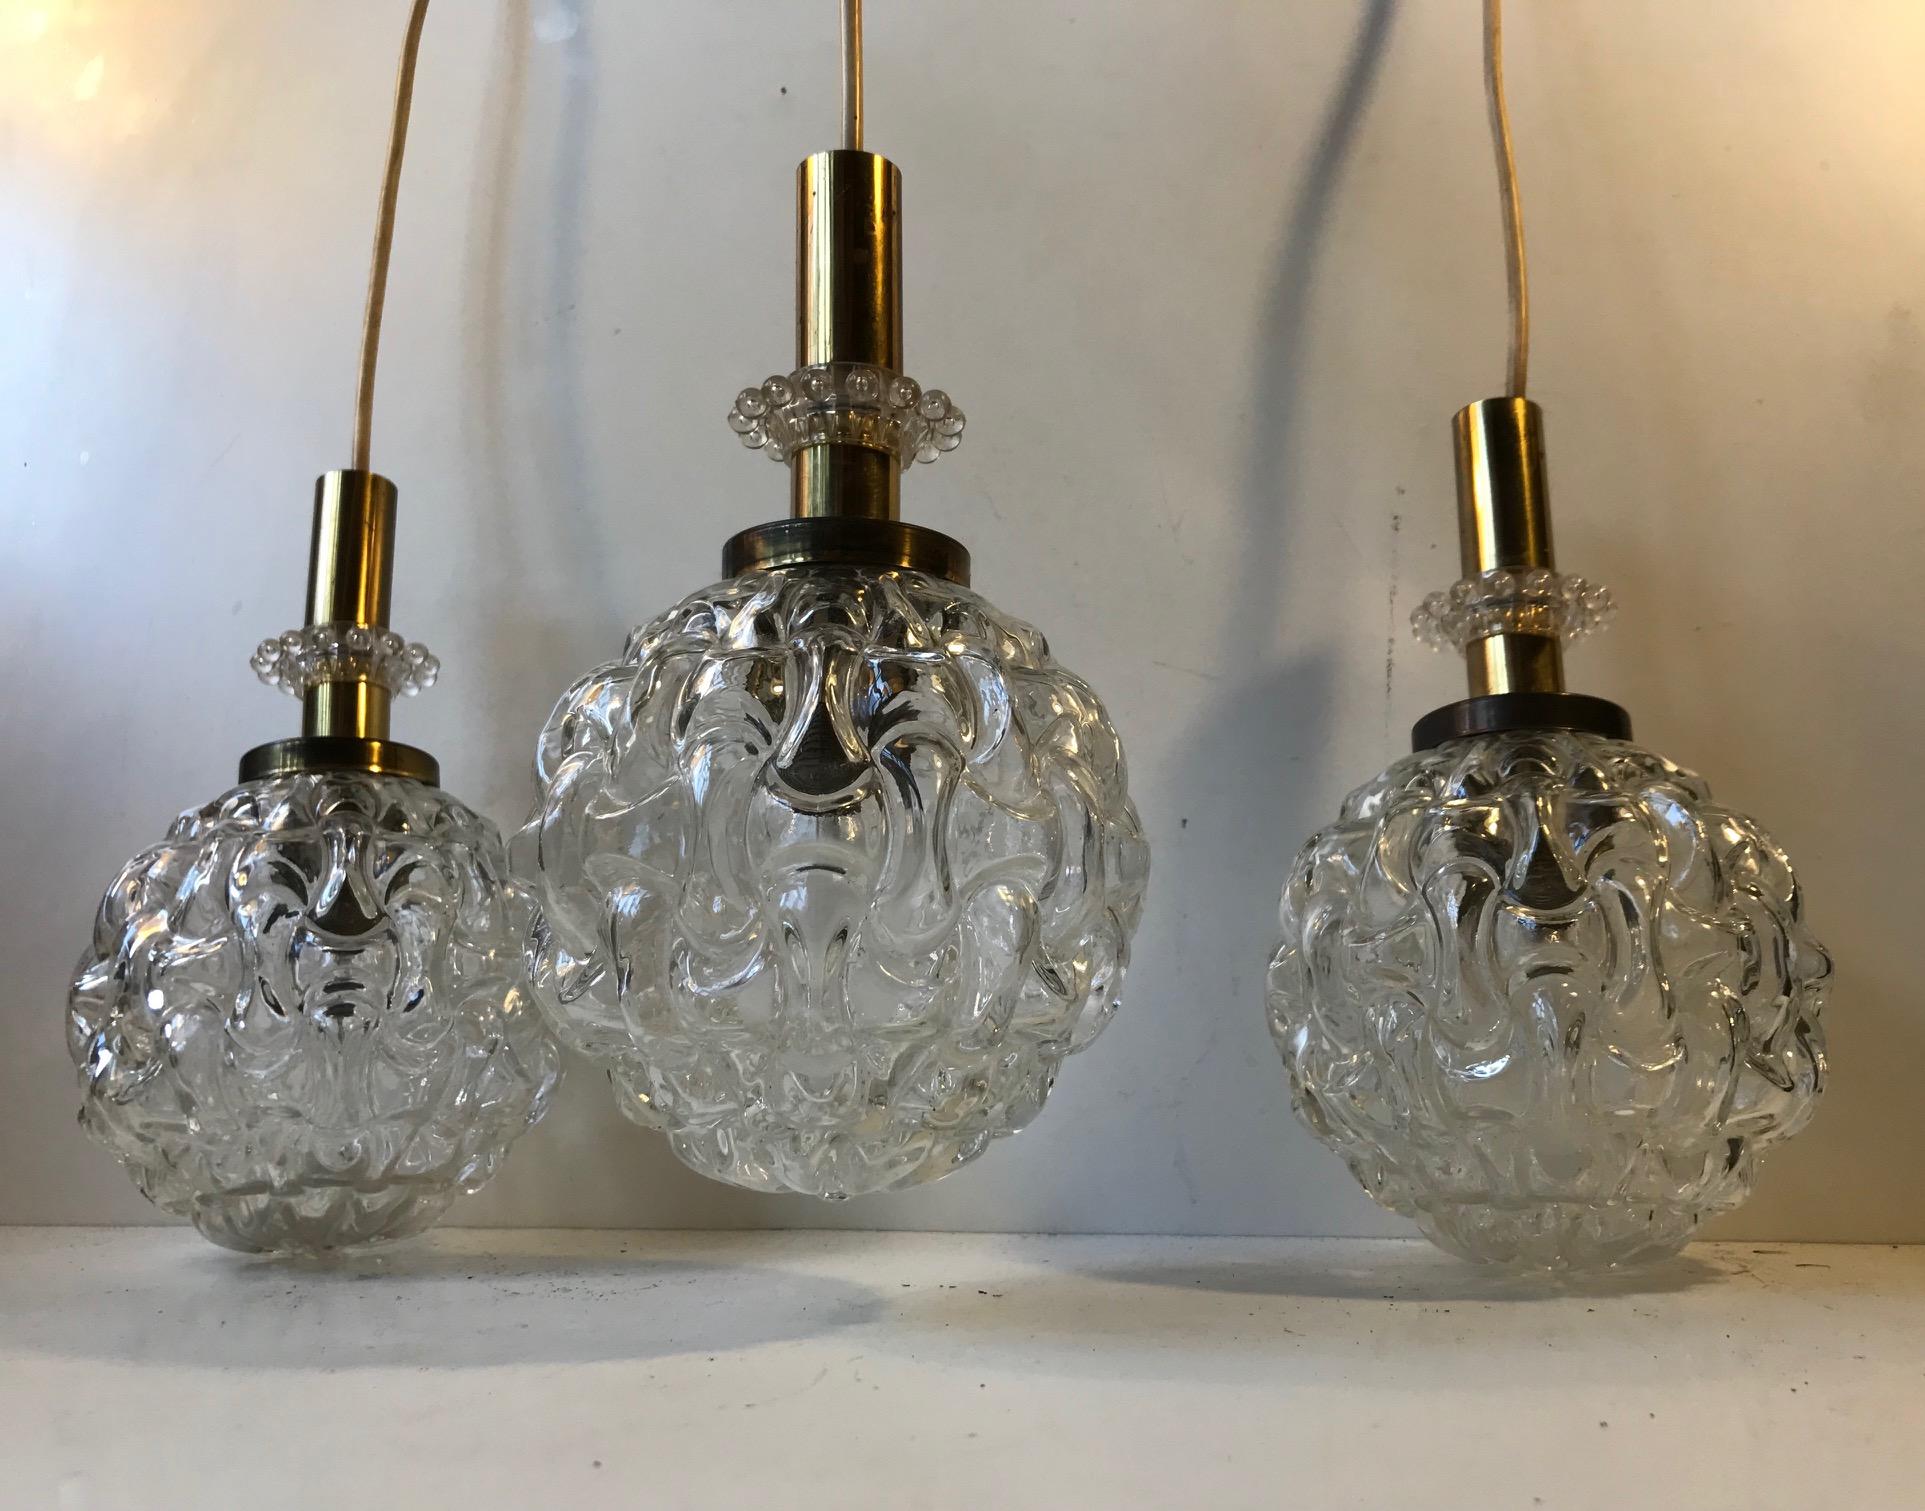 A matching trio of spherical pendant lamps fashioned out of pressed clear glass set in a solid brass top and bejeweled with a clear Lucite manchette. They came out of a Hotel in Leipzig, Germany.